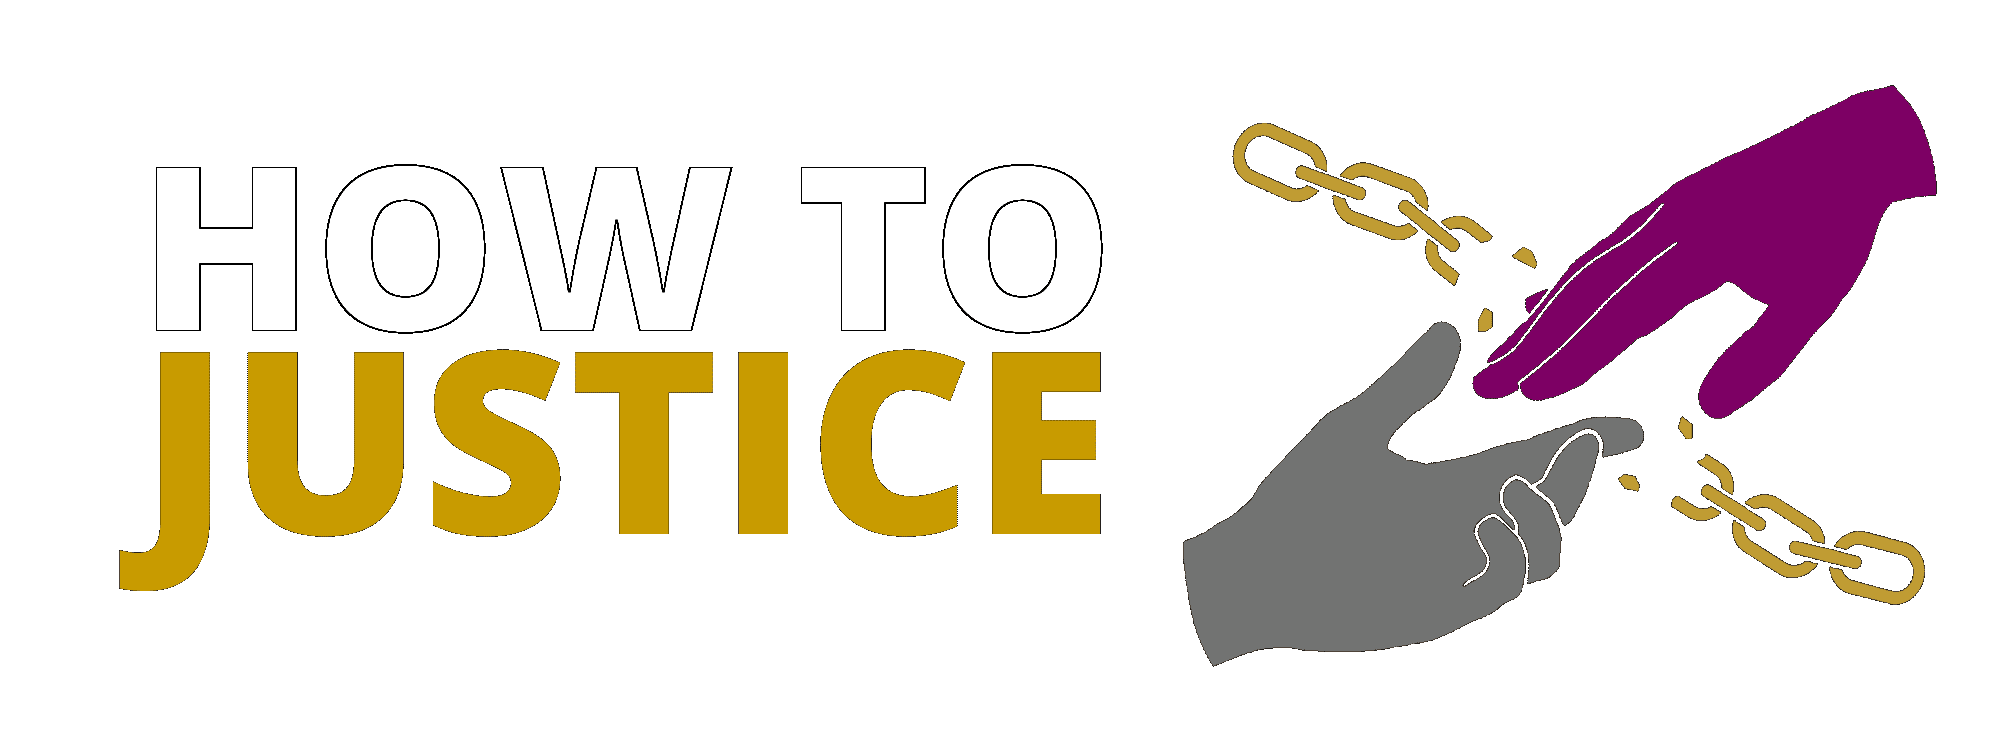 How To Justice